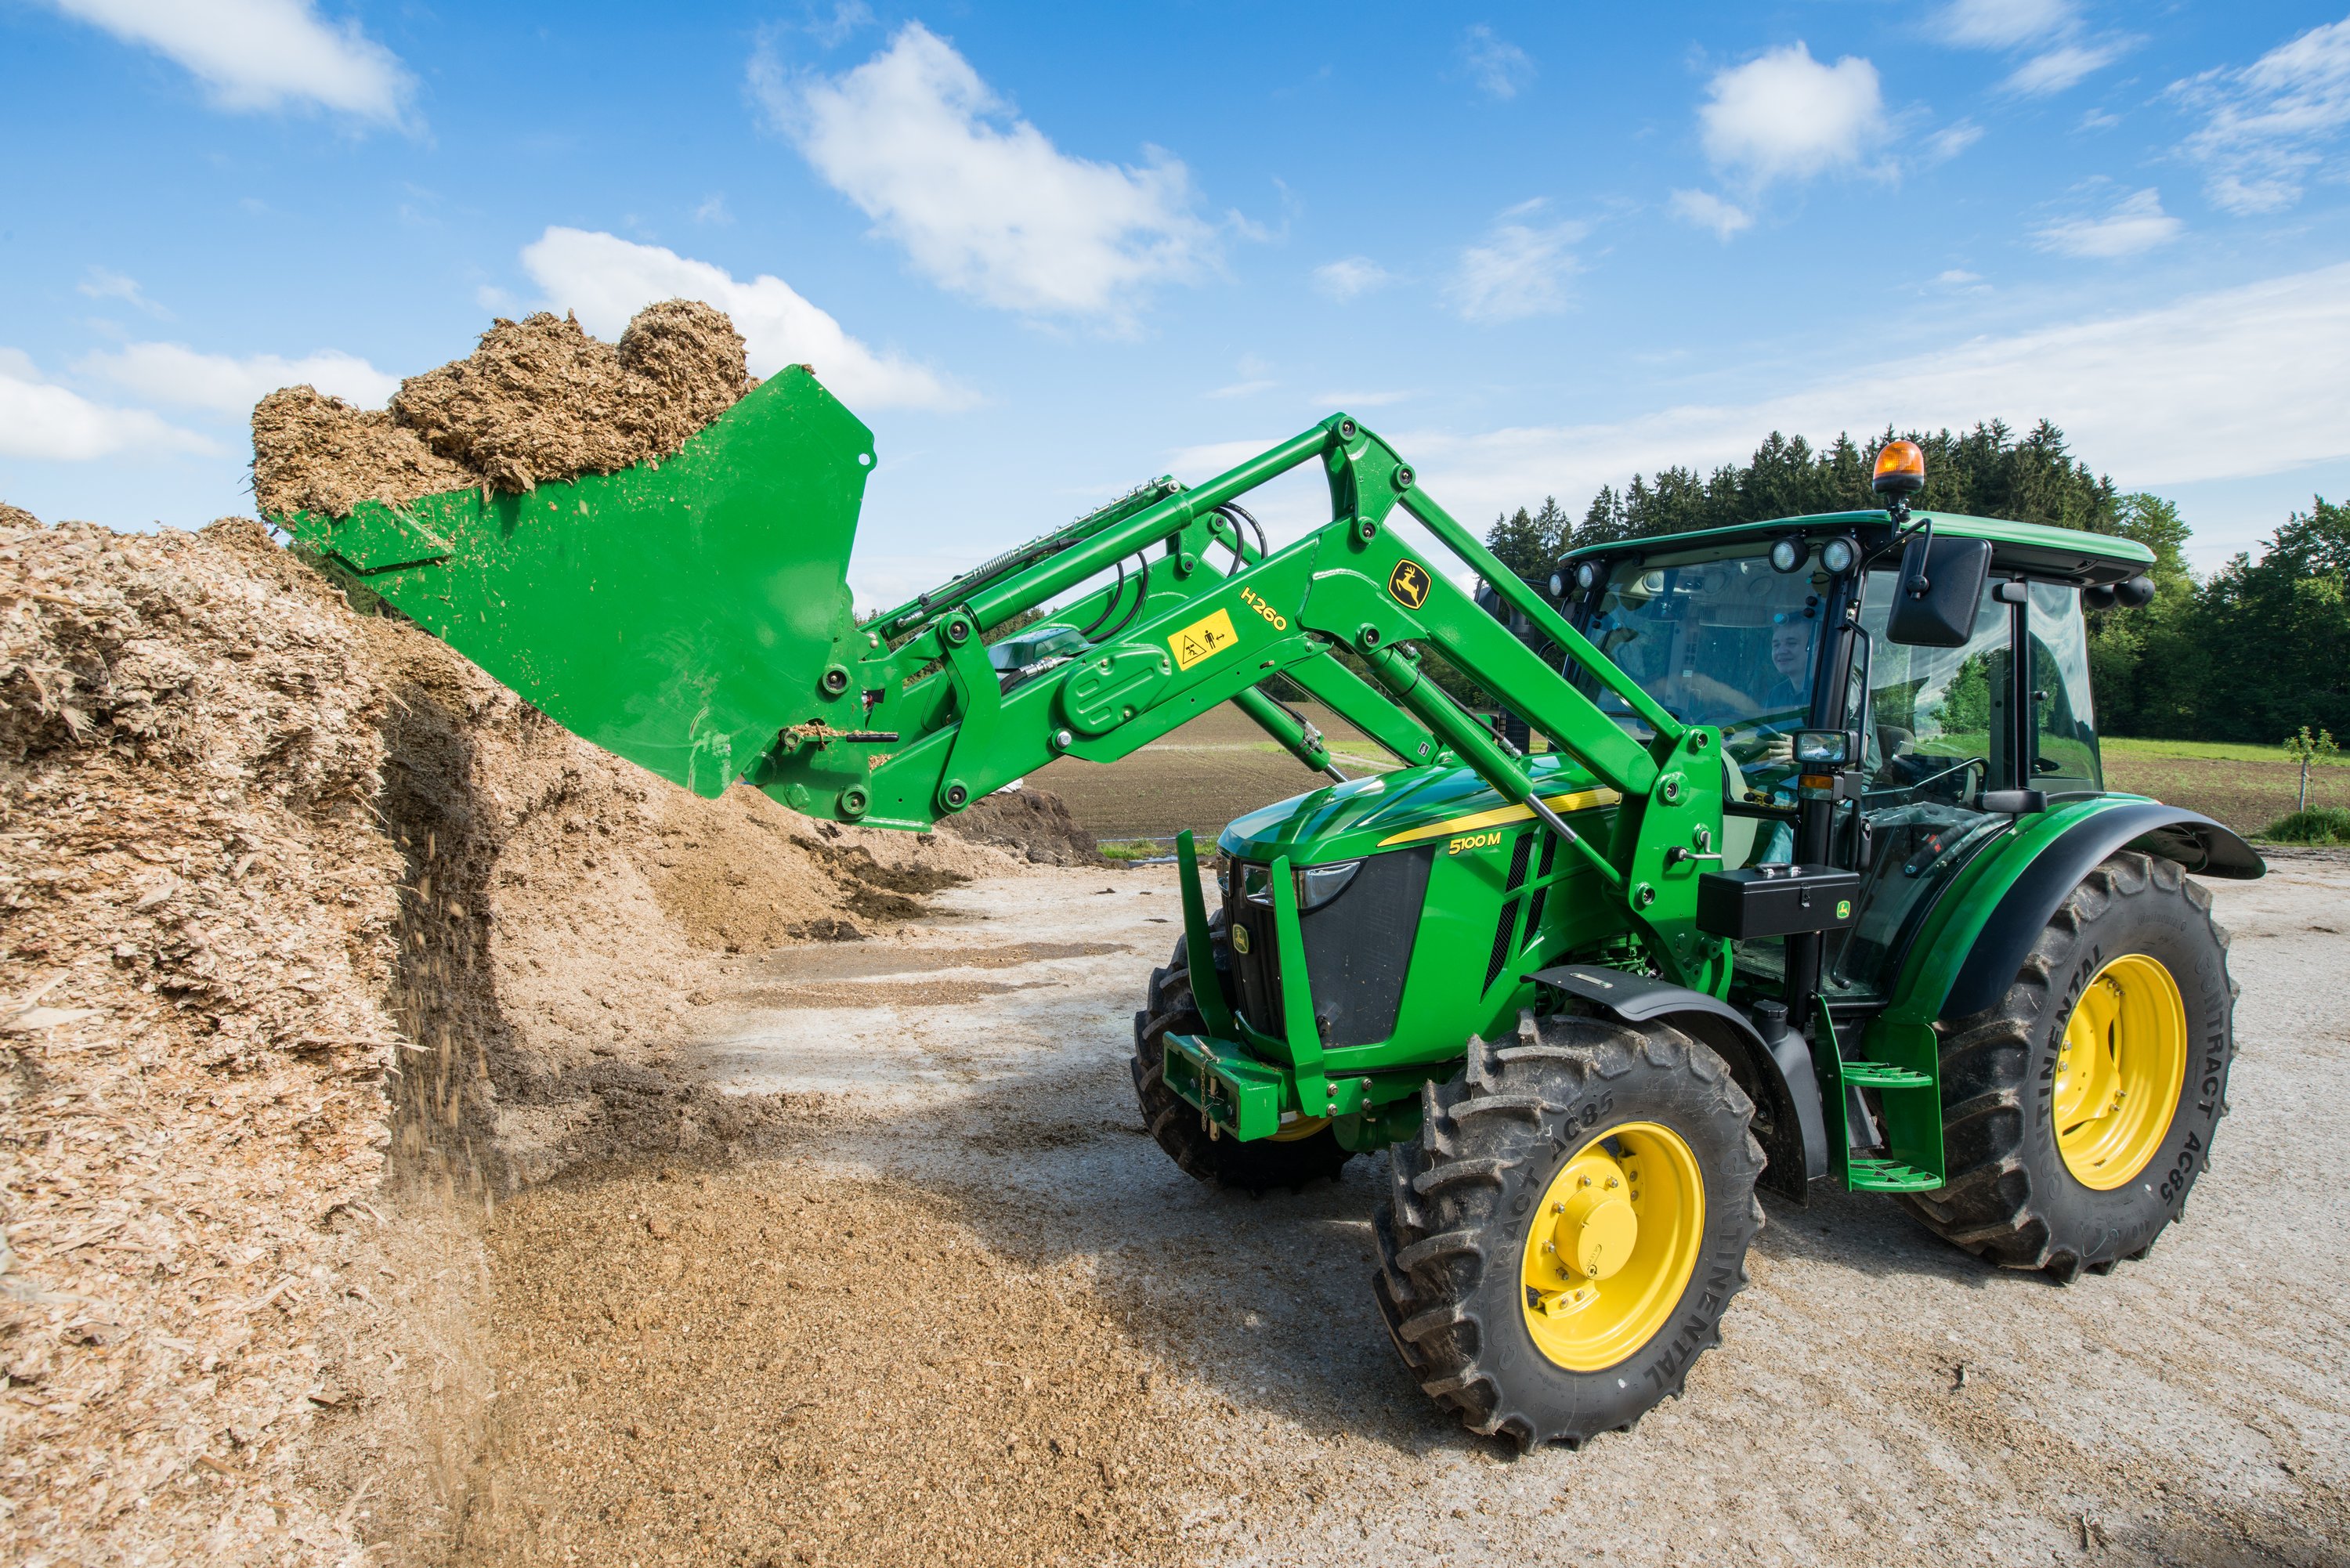 John Deere 5100M tractor with H260 front loader